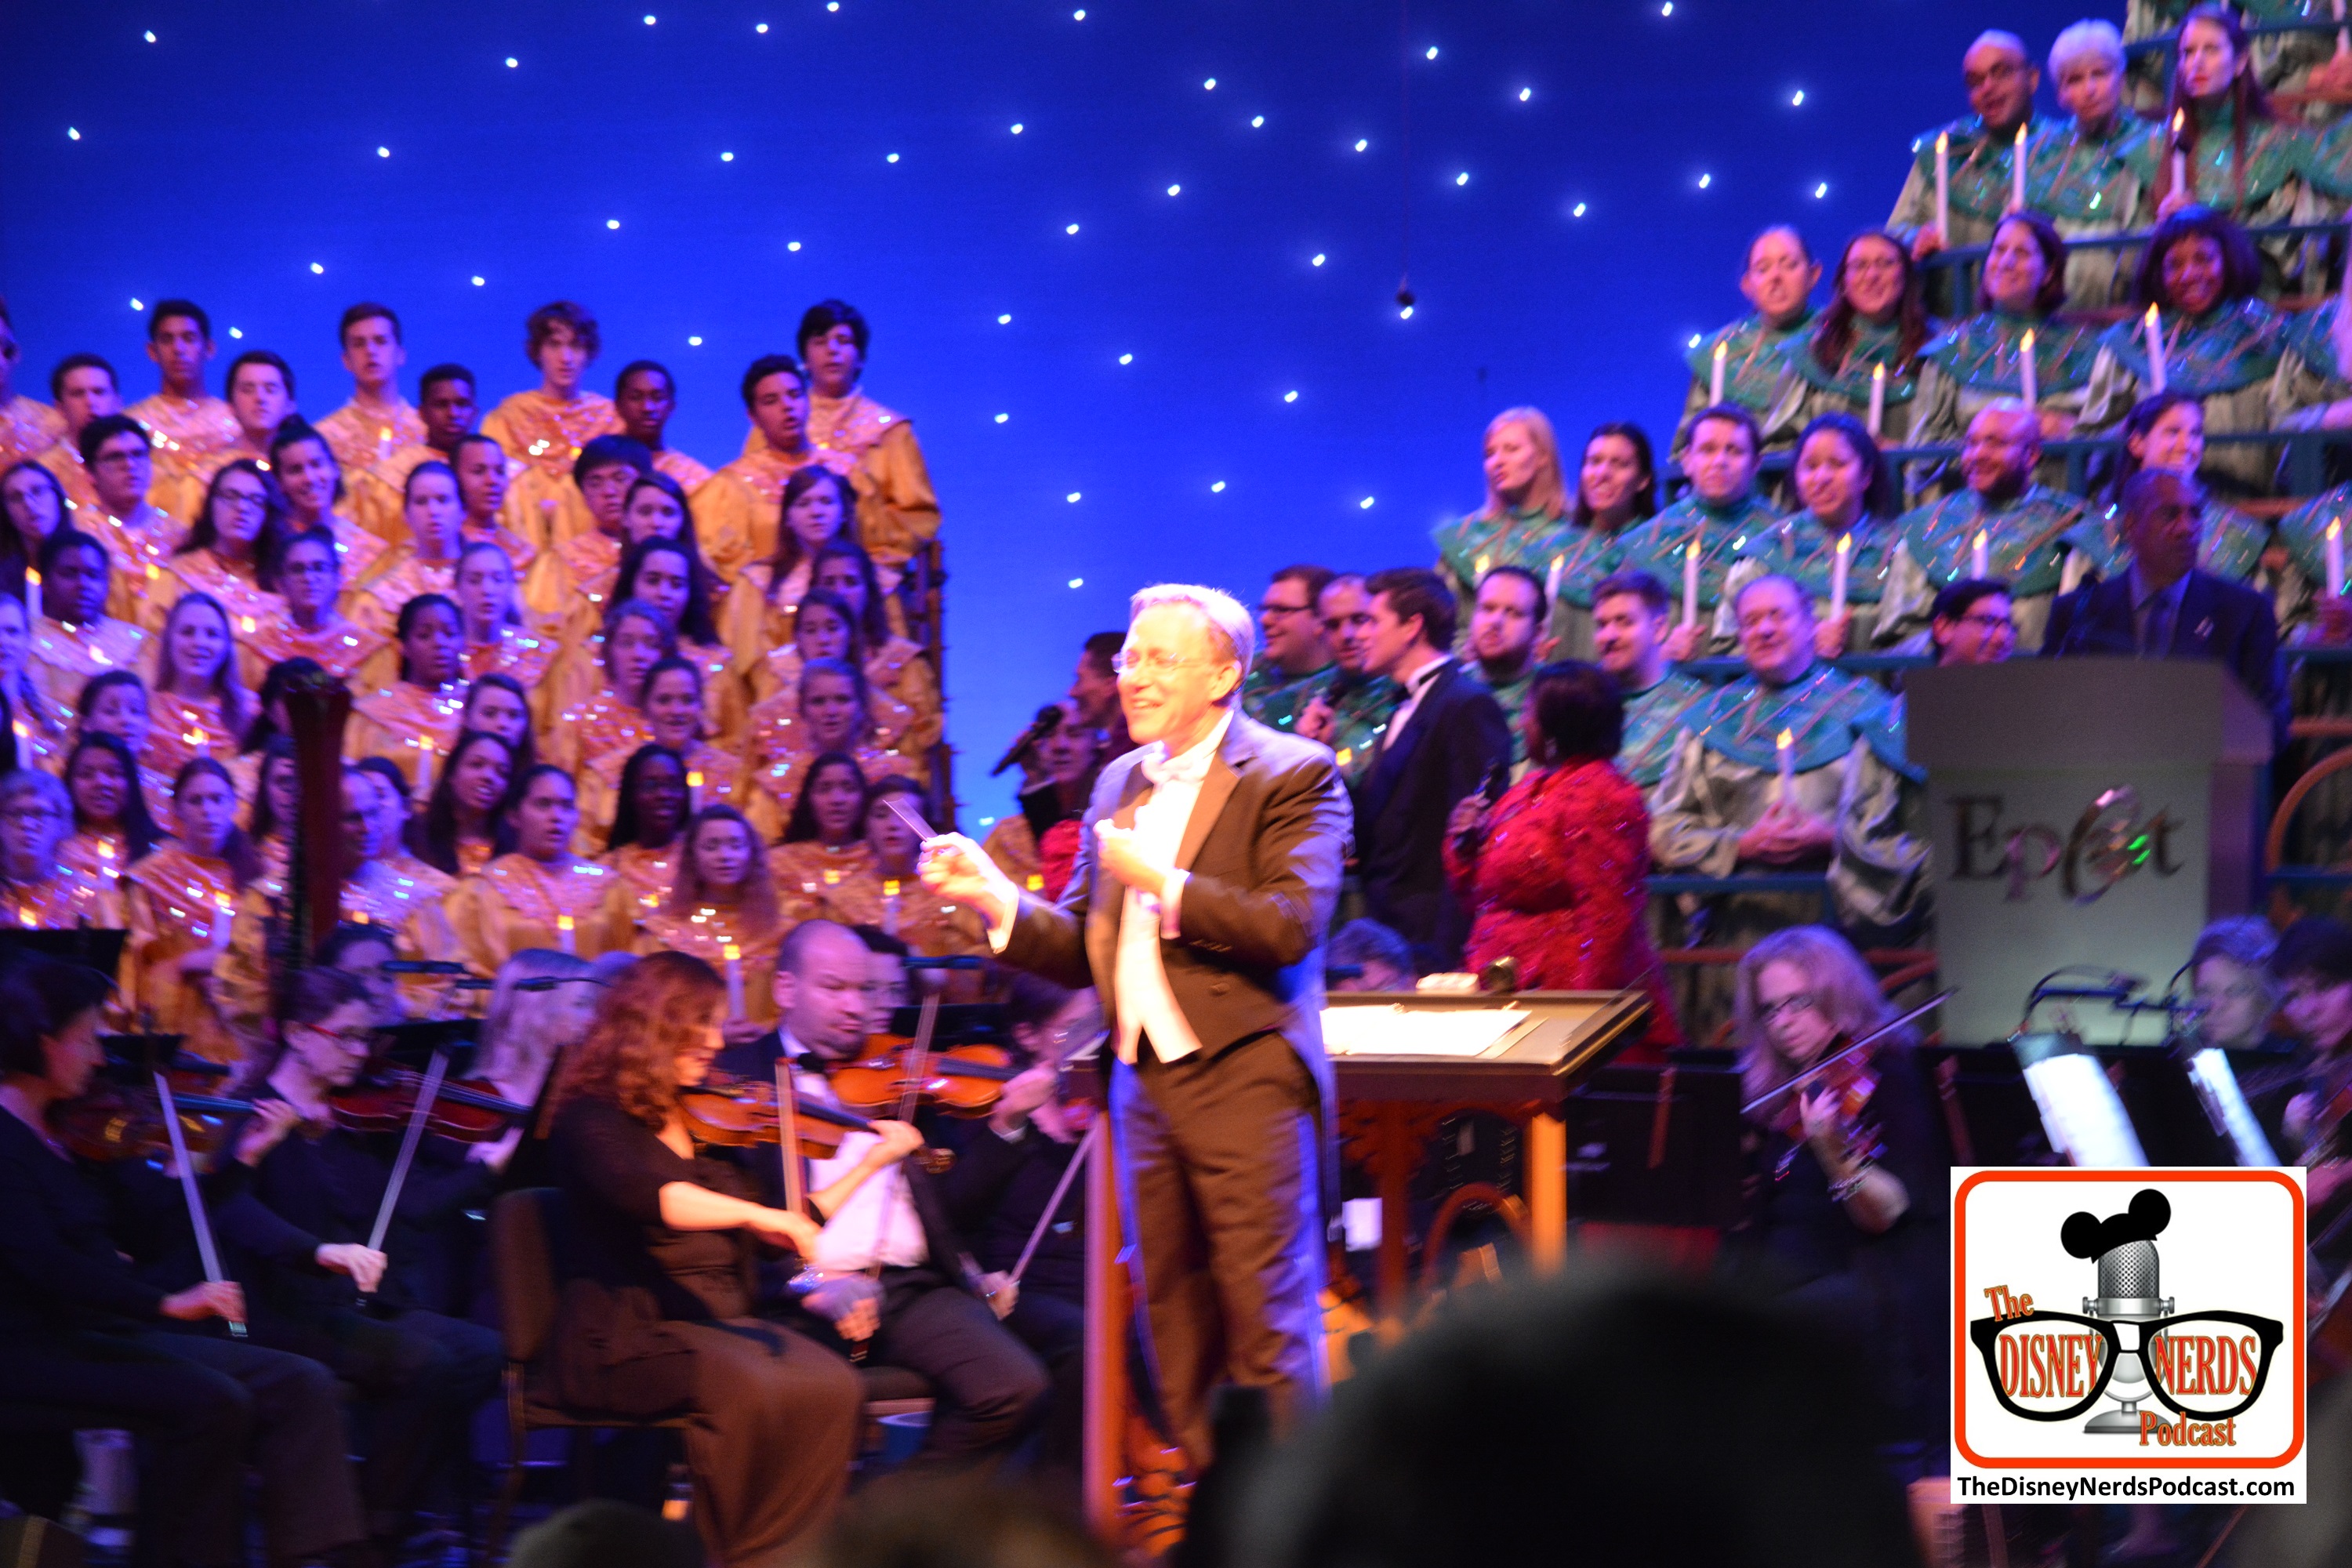 2015-12 - Epcot - The Candlelight Processional is a must see in the American Garden Theater - I Personal love watching the conductor